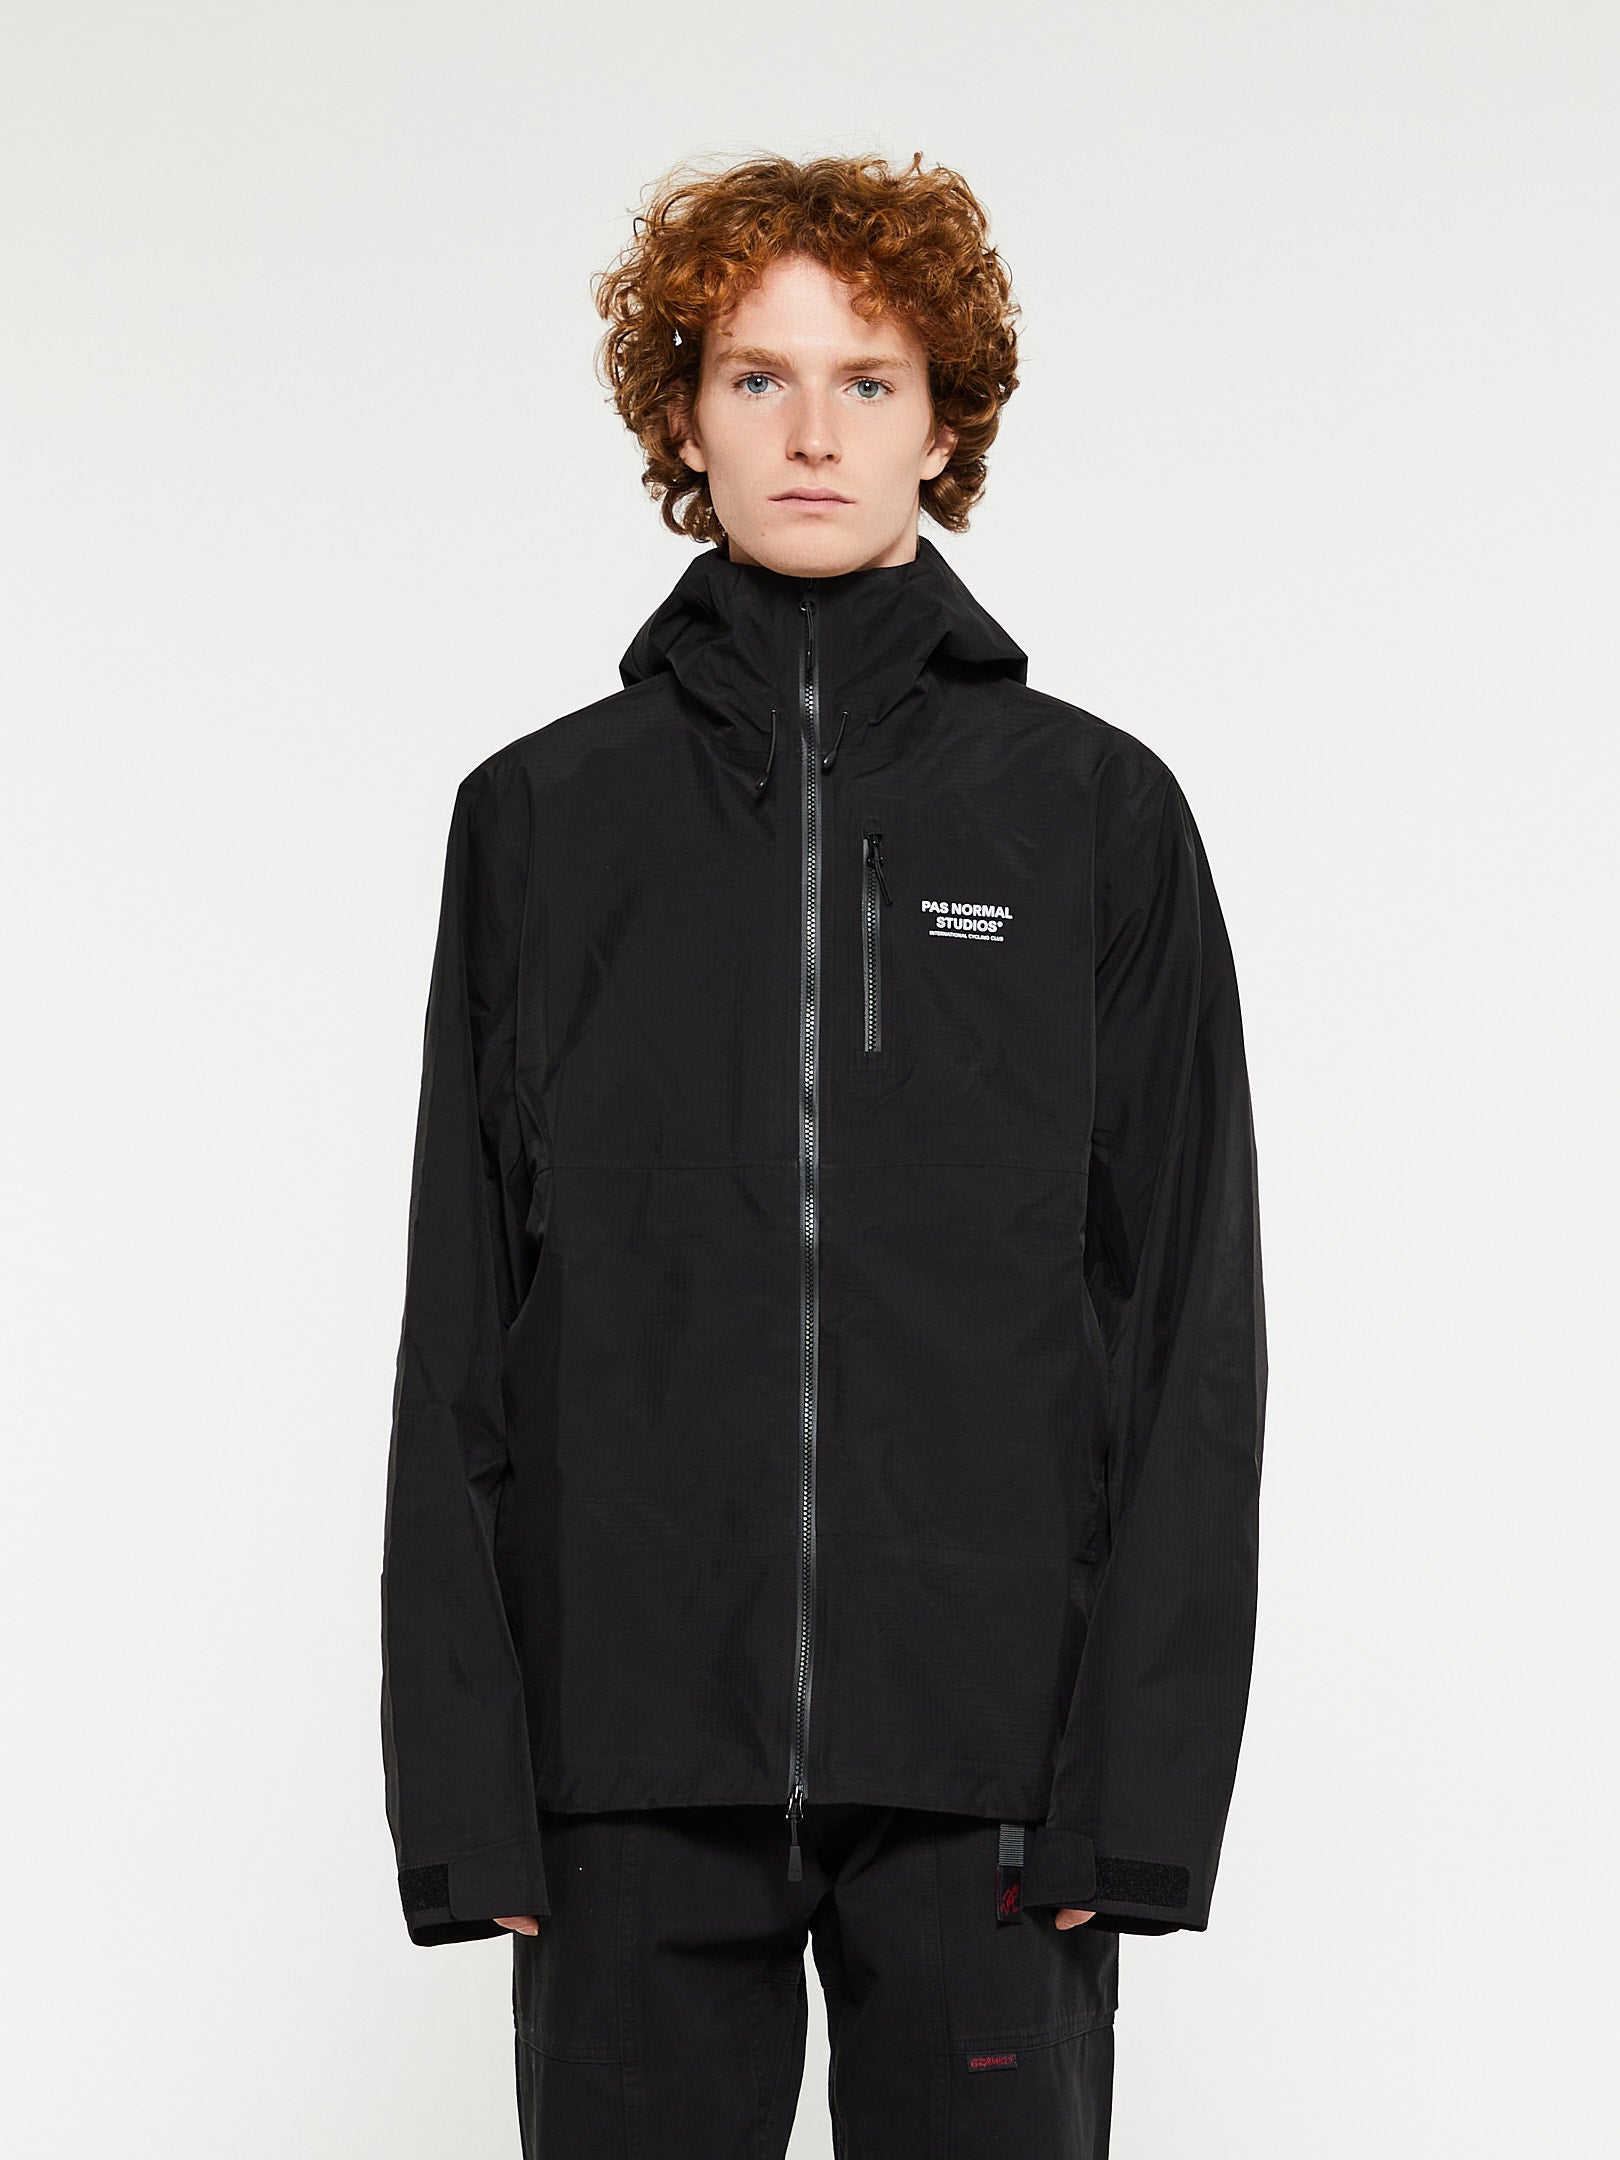 Pas Normal – Off-Race Studios Jacket Shell in - Black stoy